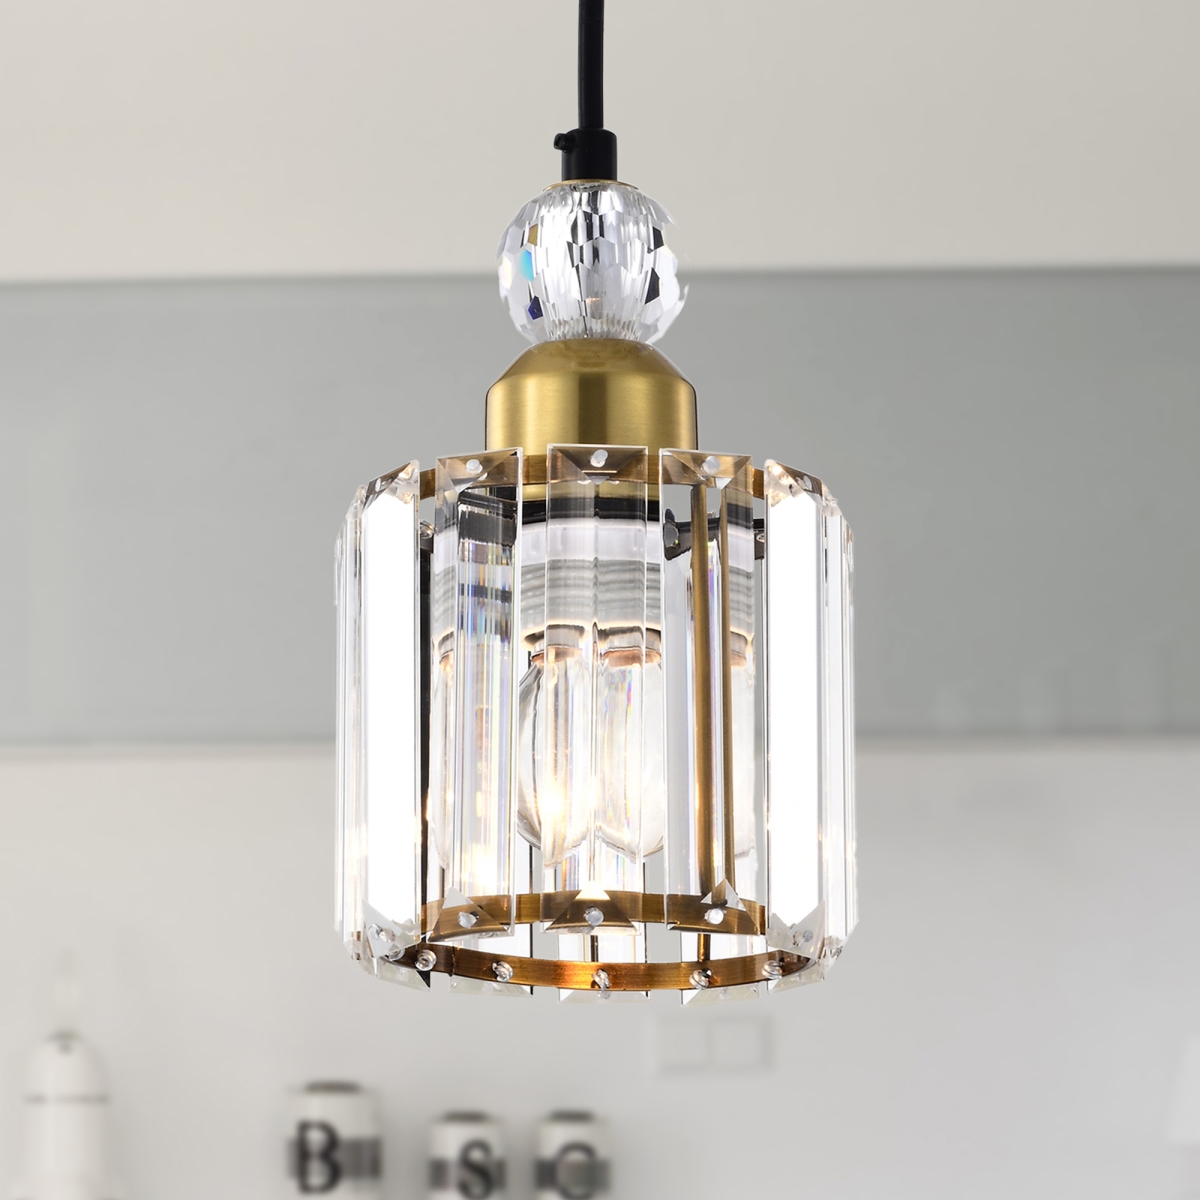 Sree 6 in. 1-Light Indoor Matte Black and Brass Finish Pendant with Light Kit